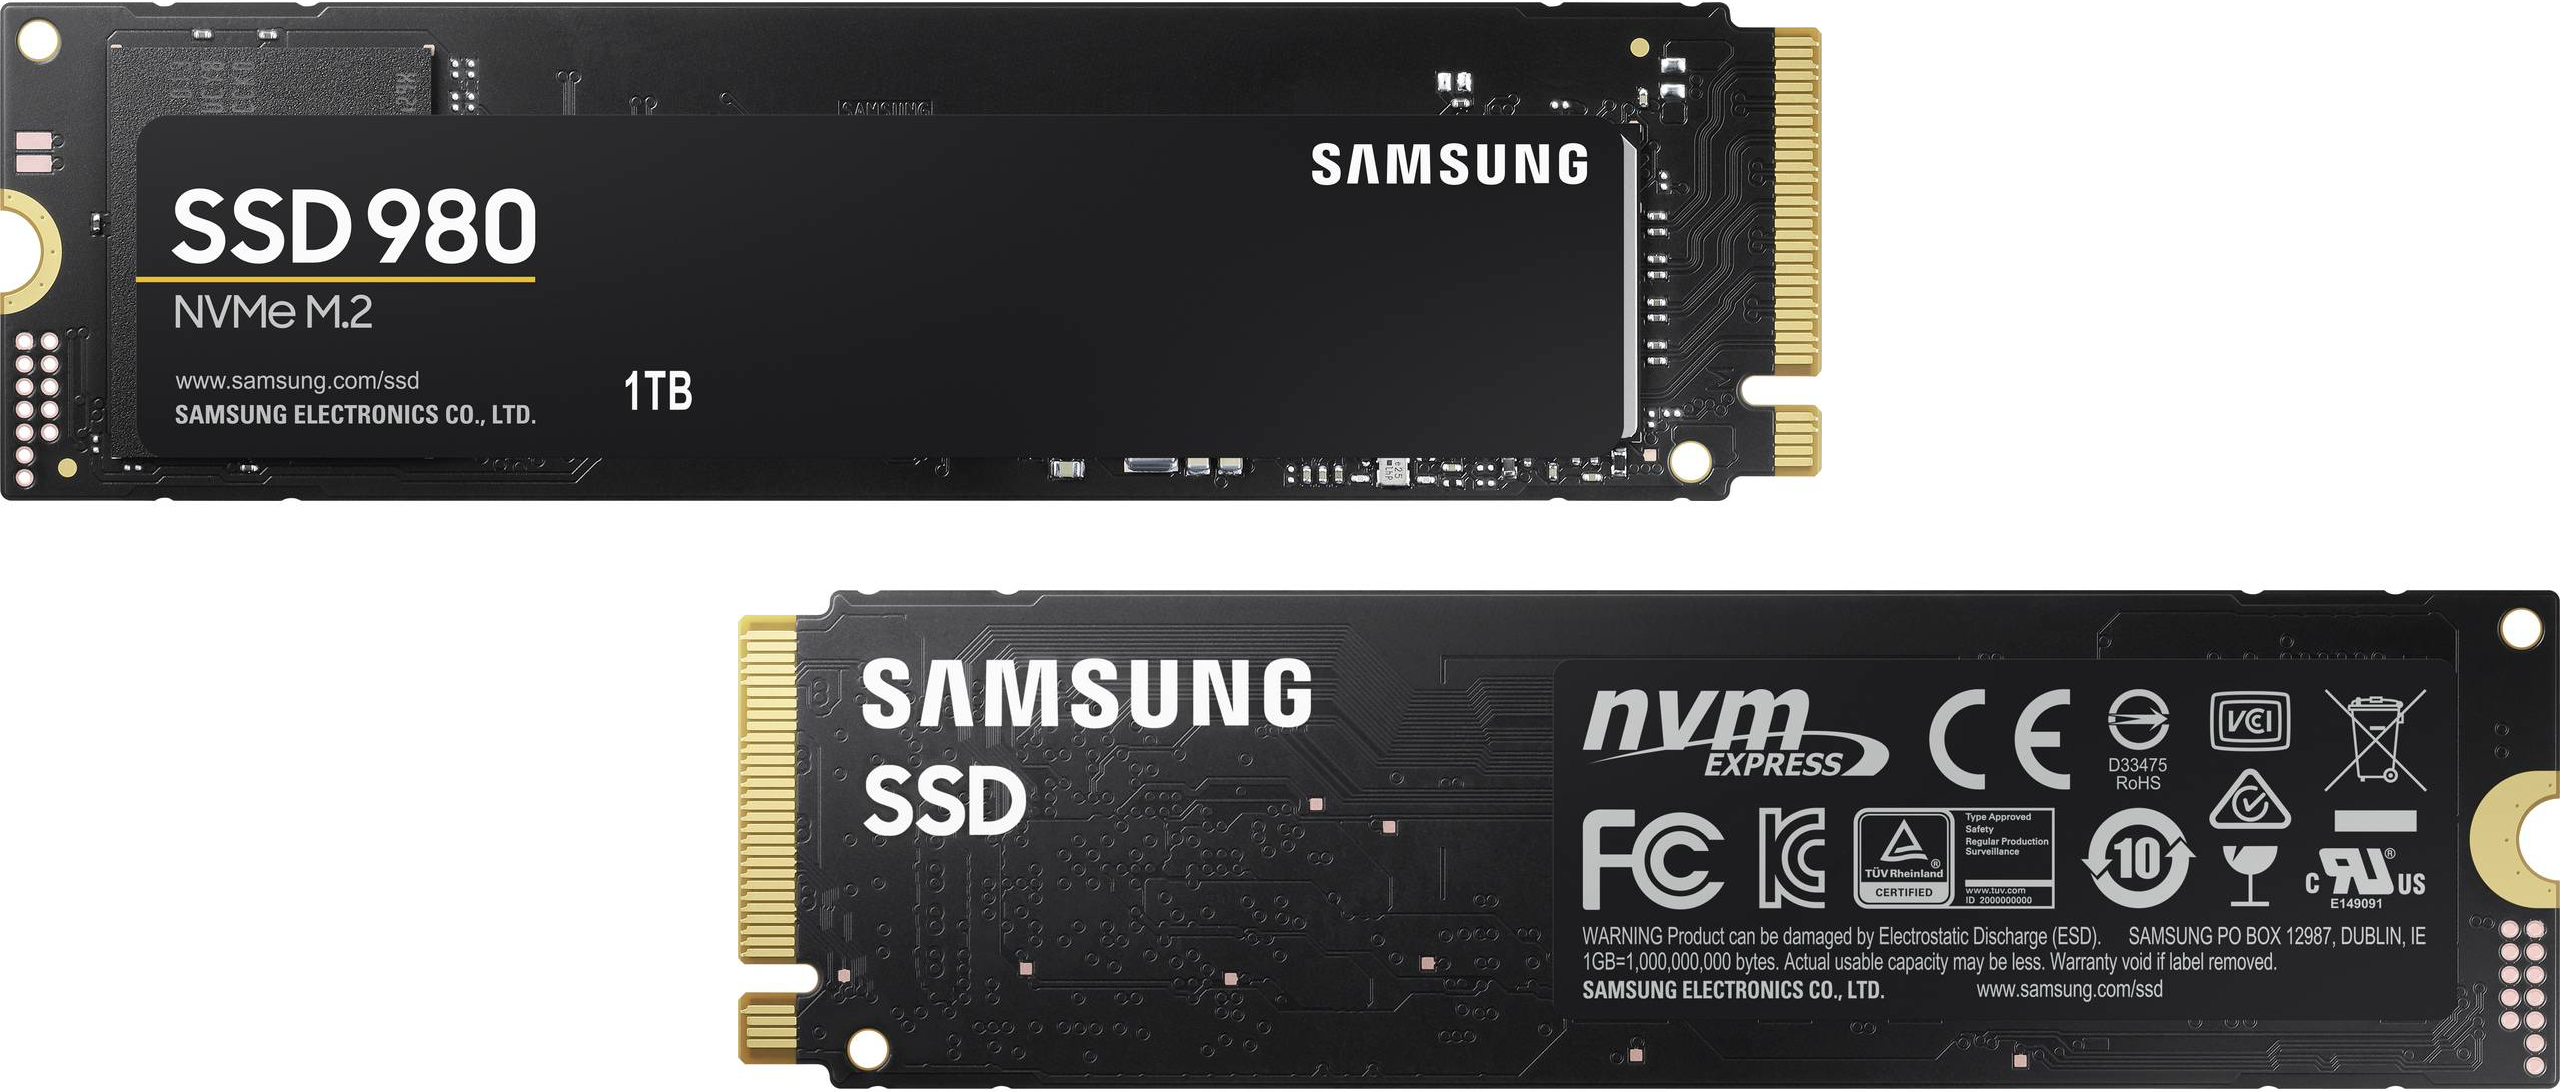 Media asset in full size related to 3dfxzone.it news item entitled as follows: I drive M.2 SSD 980 di Samsung disponibili on line: i prezzi dei pre-order | Image Name: news31771_Samsung-SSD-980_1.png